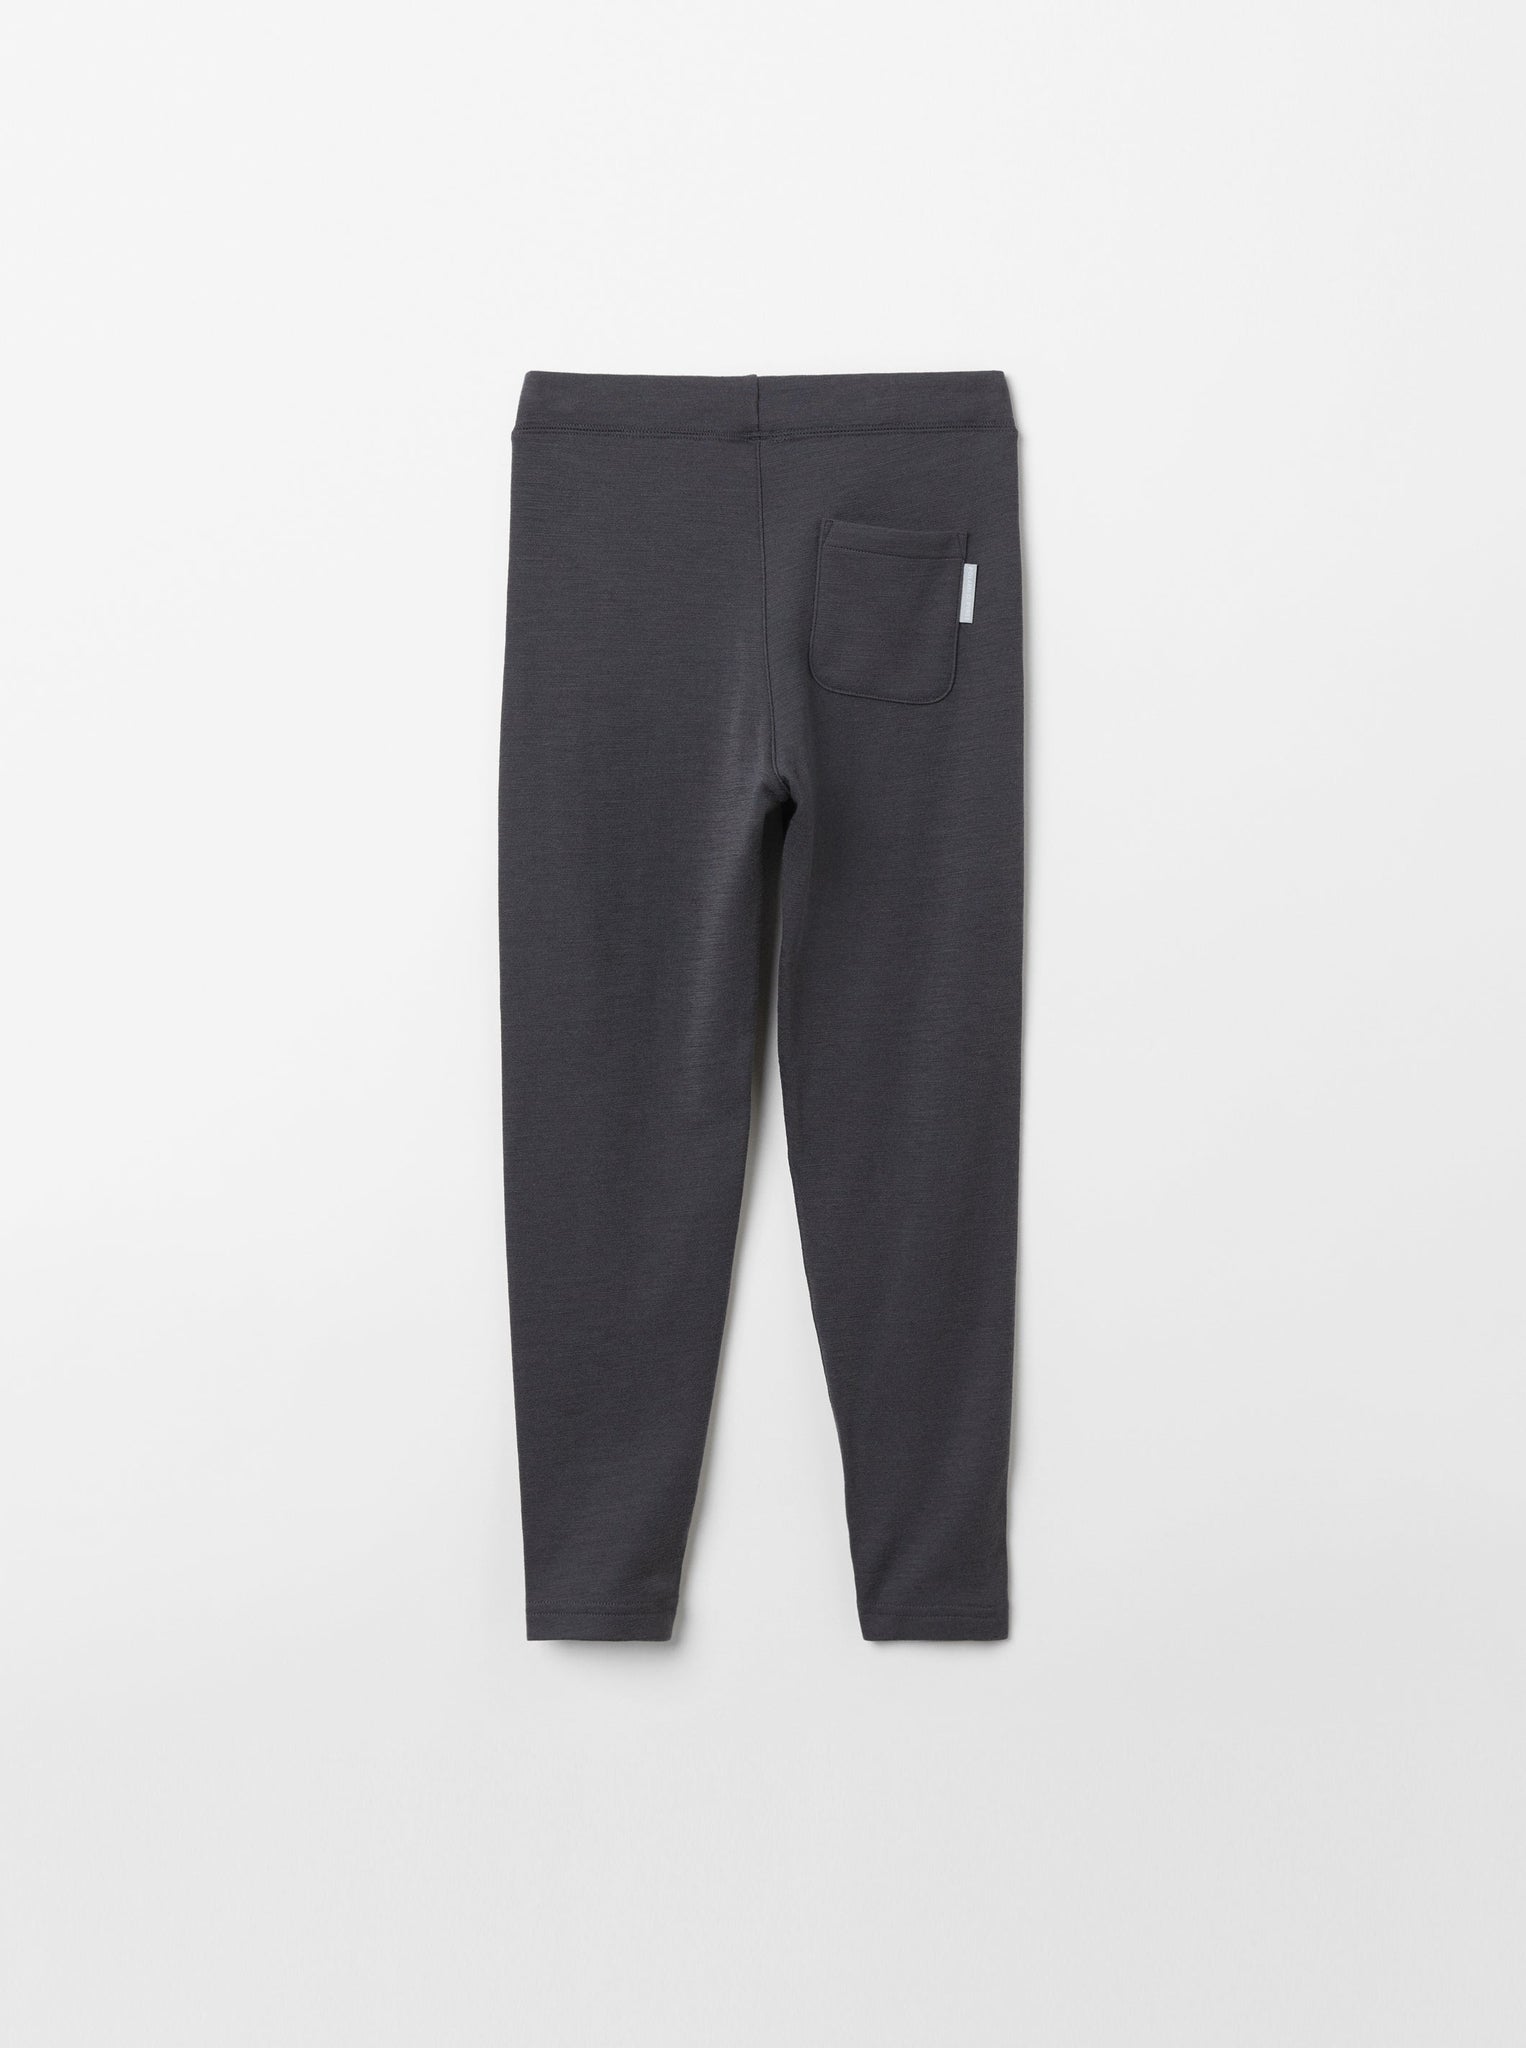 Merino Wool Grey Kids Leggings from the Polarn O. Pyret kidswear collection. Ethically produced kids clothing.